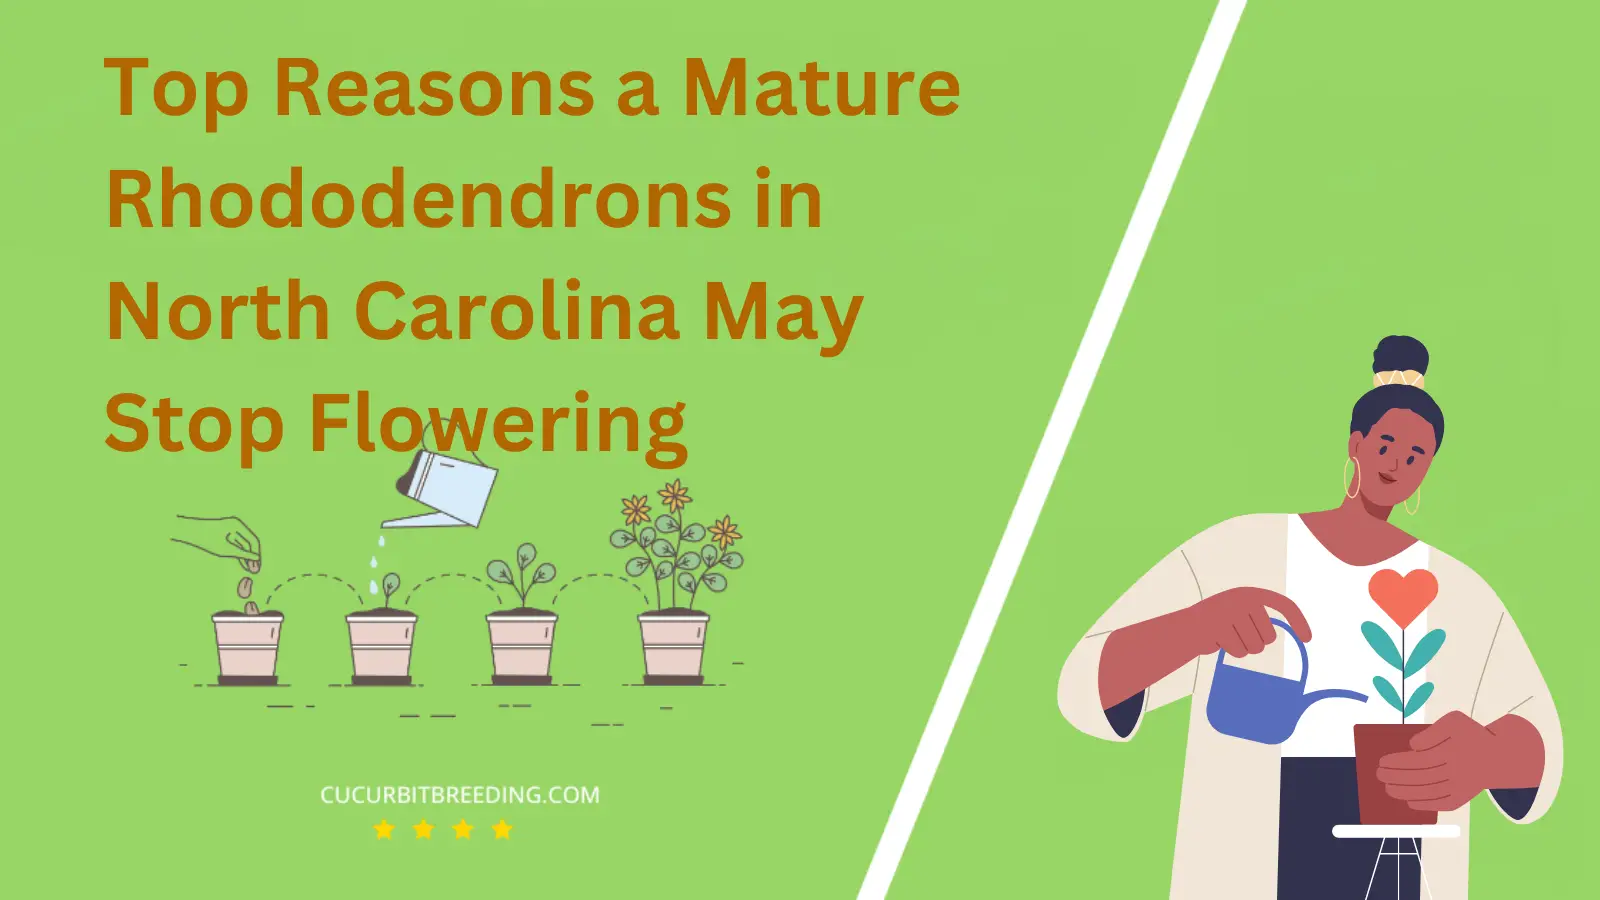 Top Reasons a Mature Rhododendrons in North Carolina May Stop Flowering